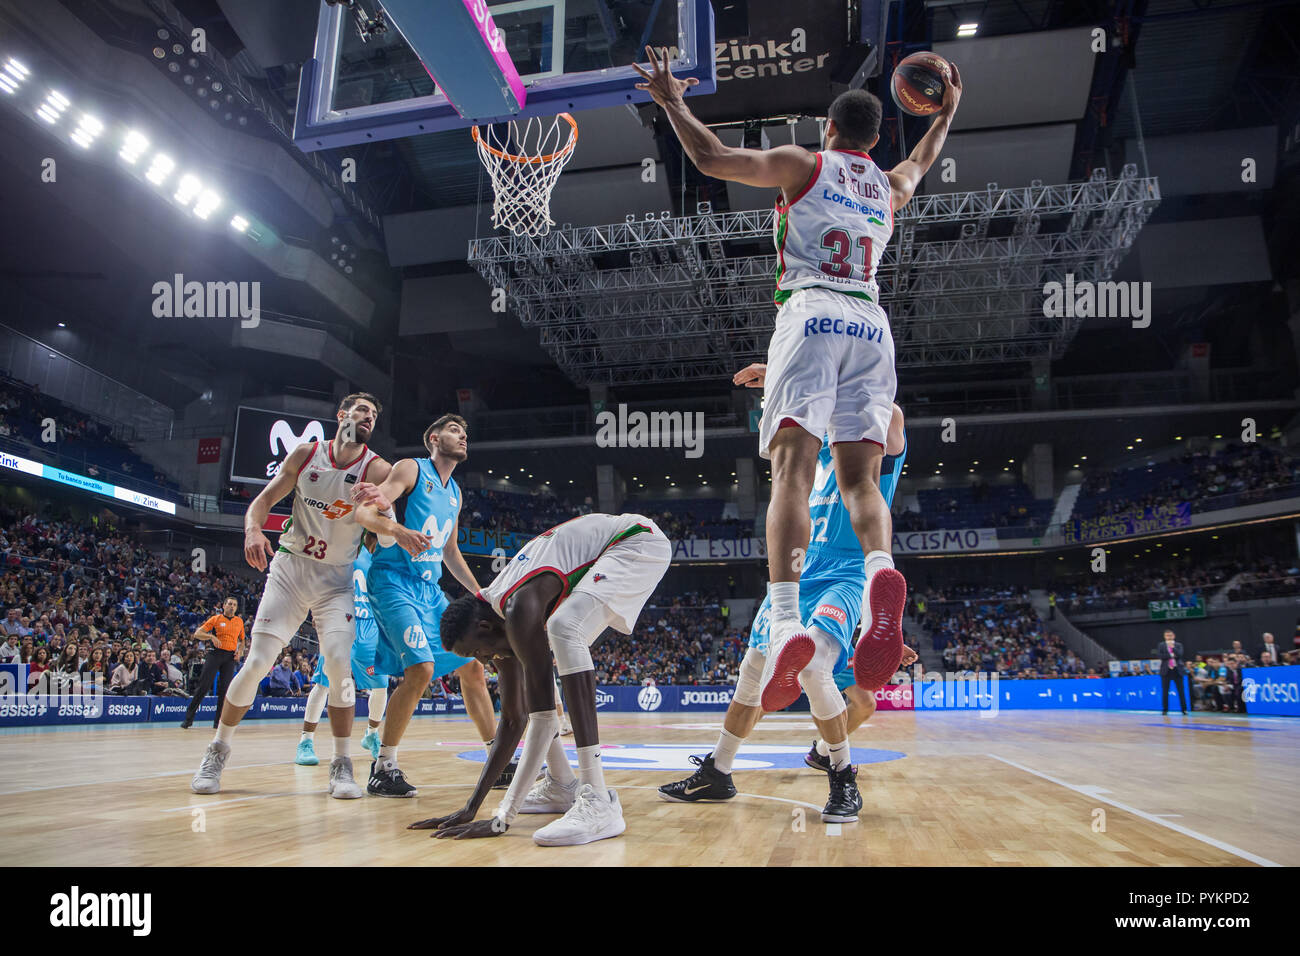 Madrid, Spain. 28th Oct, 2018. Shavon Shields during Kirolbet Baskonia  victory over Movistar Estudiantes (67 - 100) in Liga Endesa regular season  game (day 6) celebrated in Madrid at Wizink Center. October